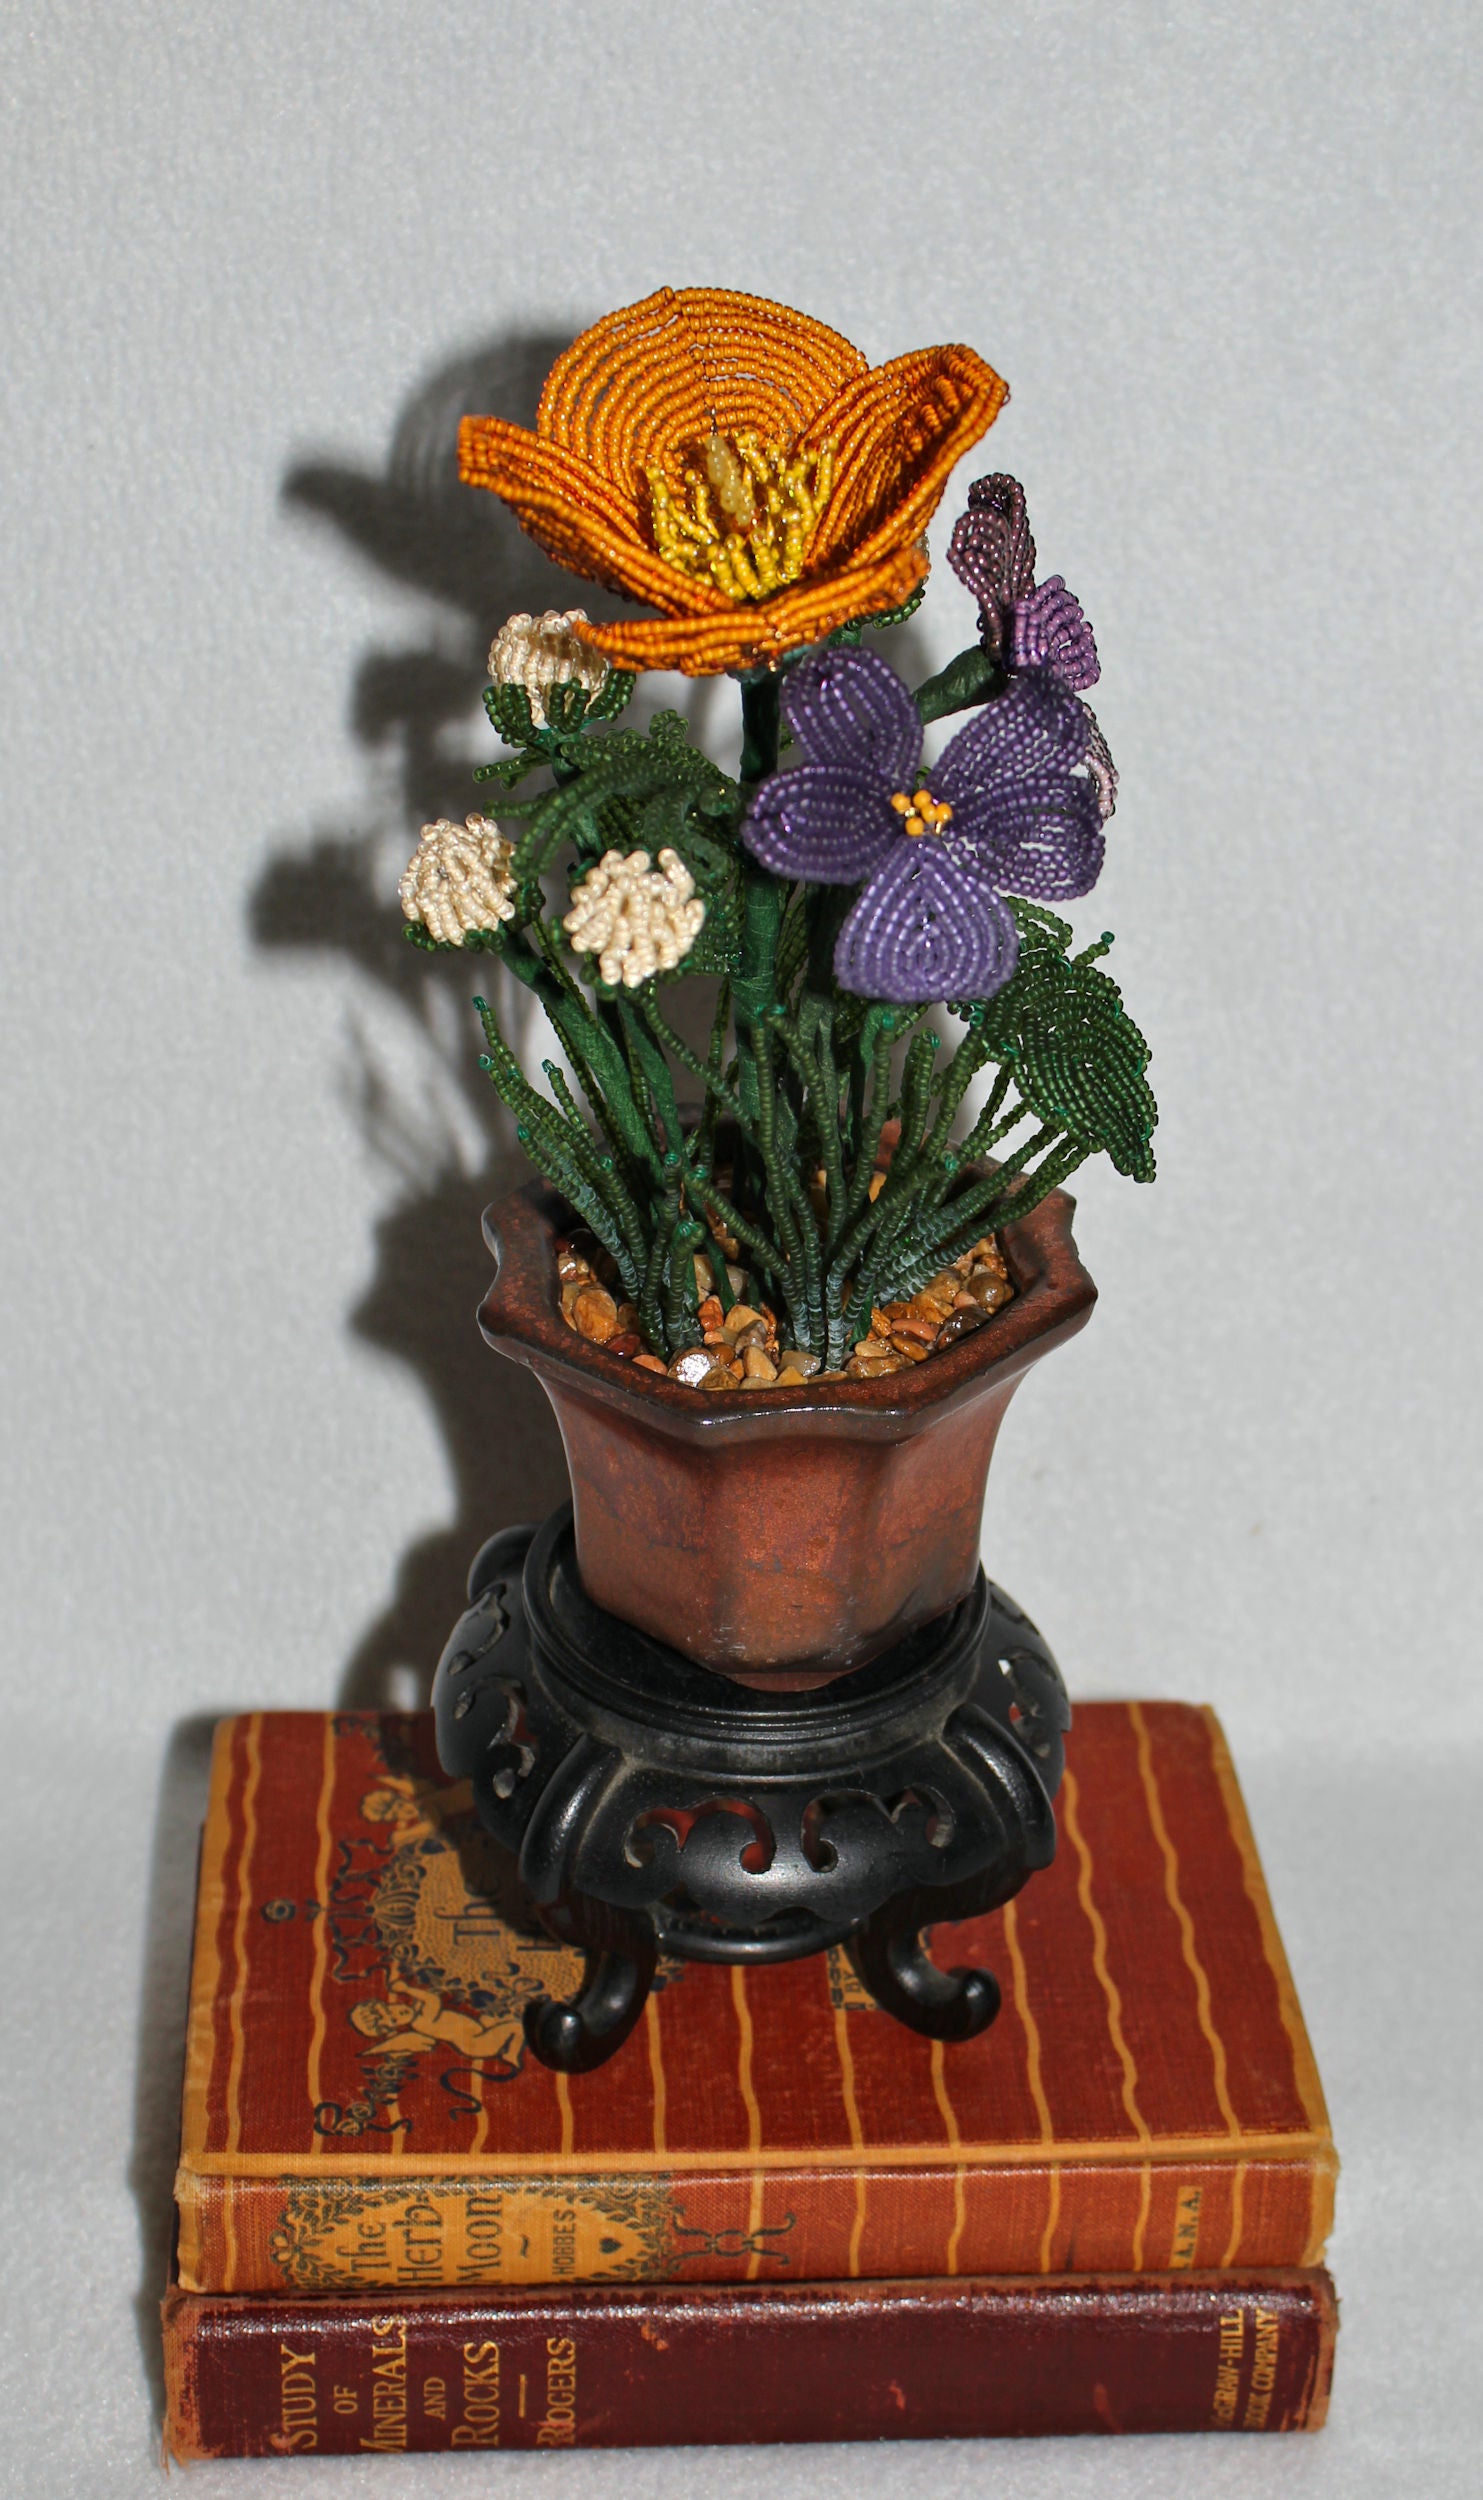 California Poppy and Violets - SOLD